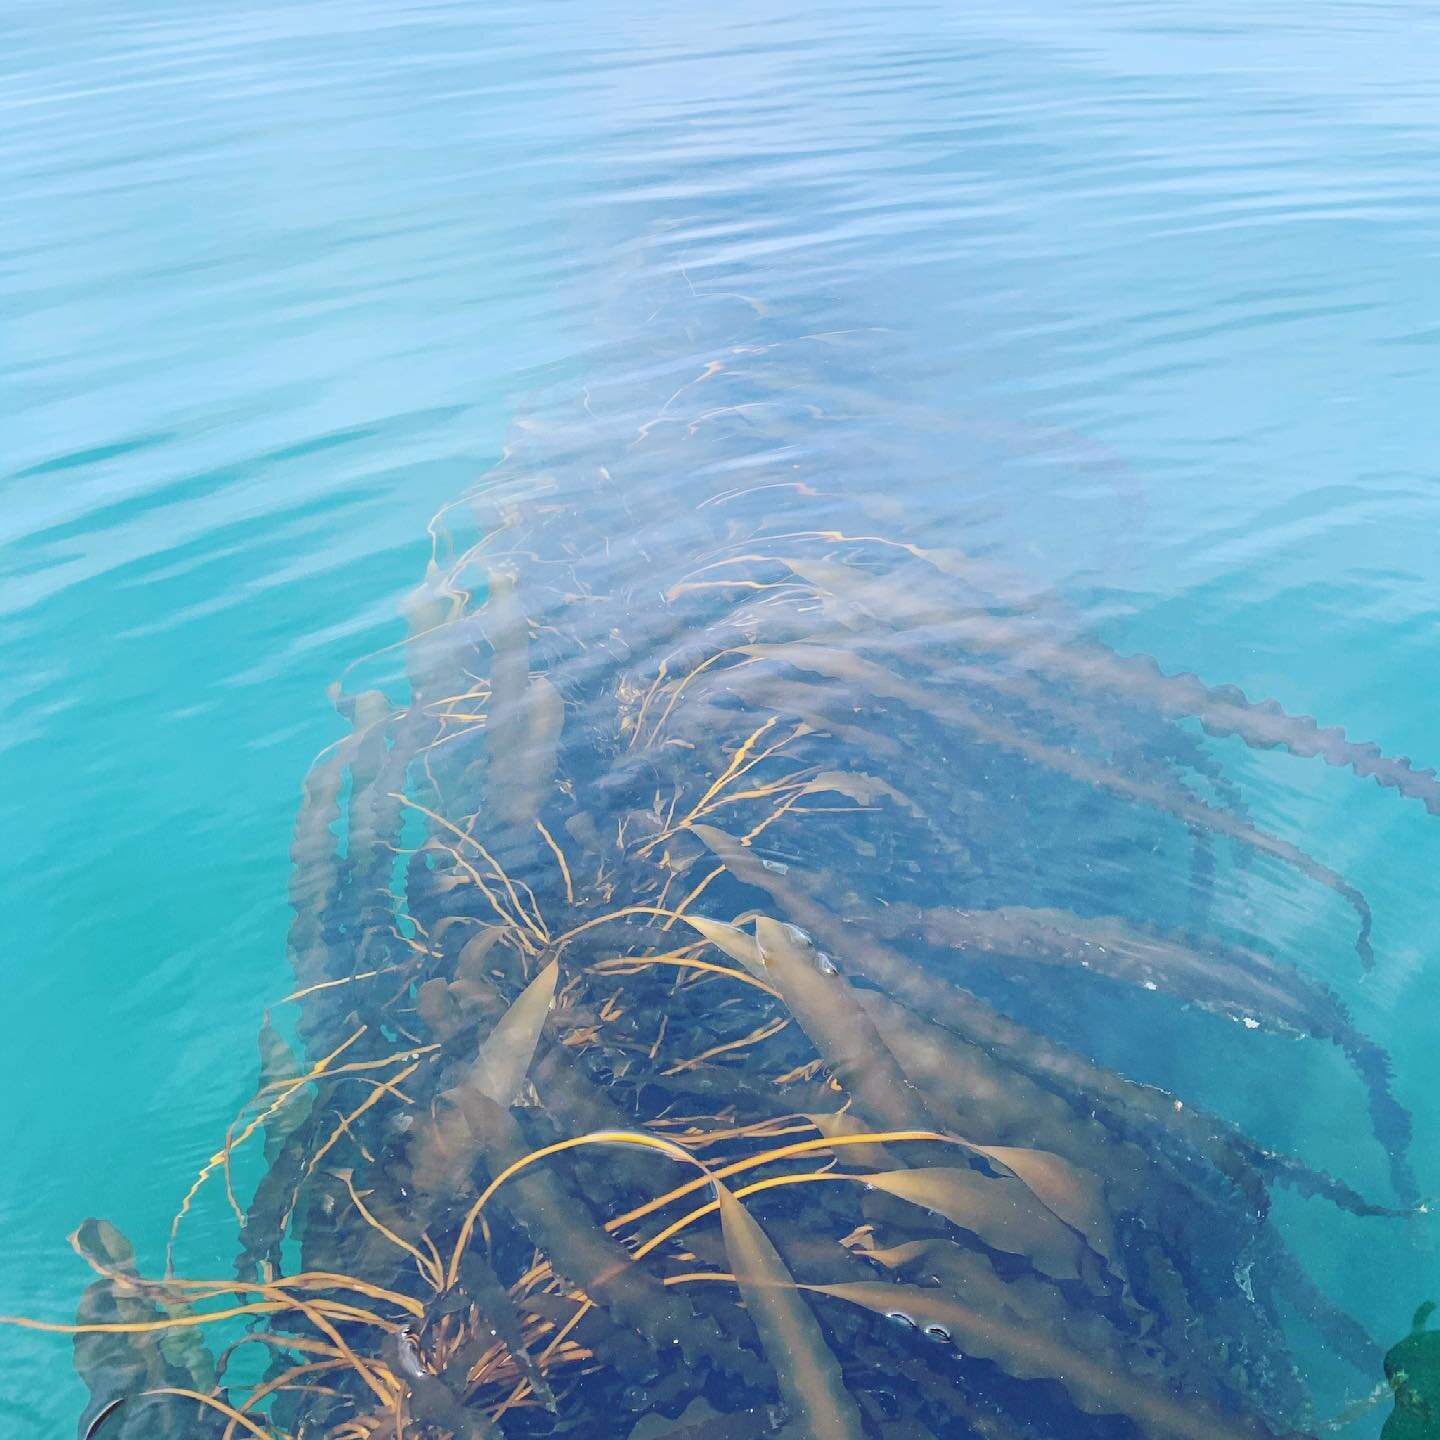 The water in fisher&rsquo;s island sound has some insane clarity - we averaged 20 feet this year when measuring with our secchi disk. The kelp can lay low in the colder water and still photosynthesize while fully taking advantage of the nutrient load